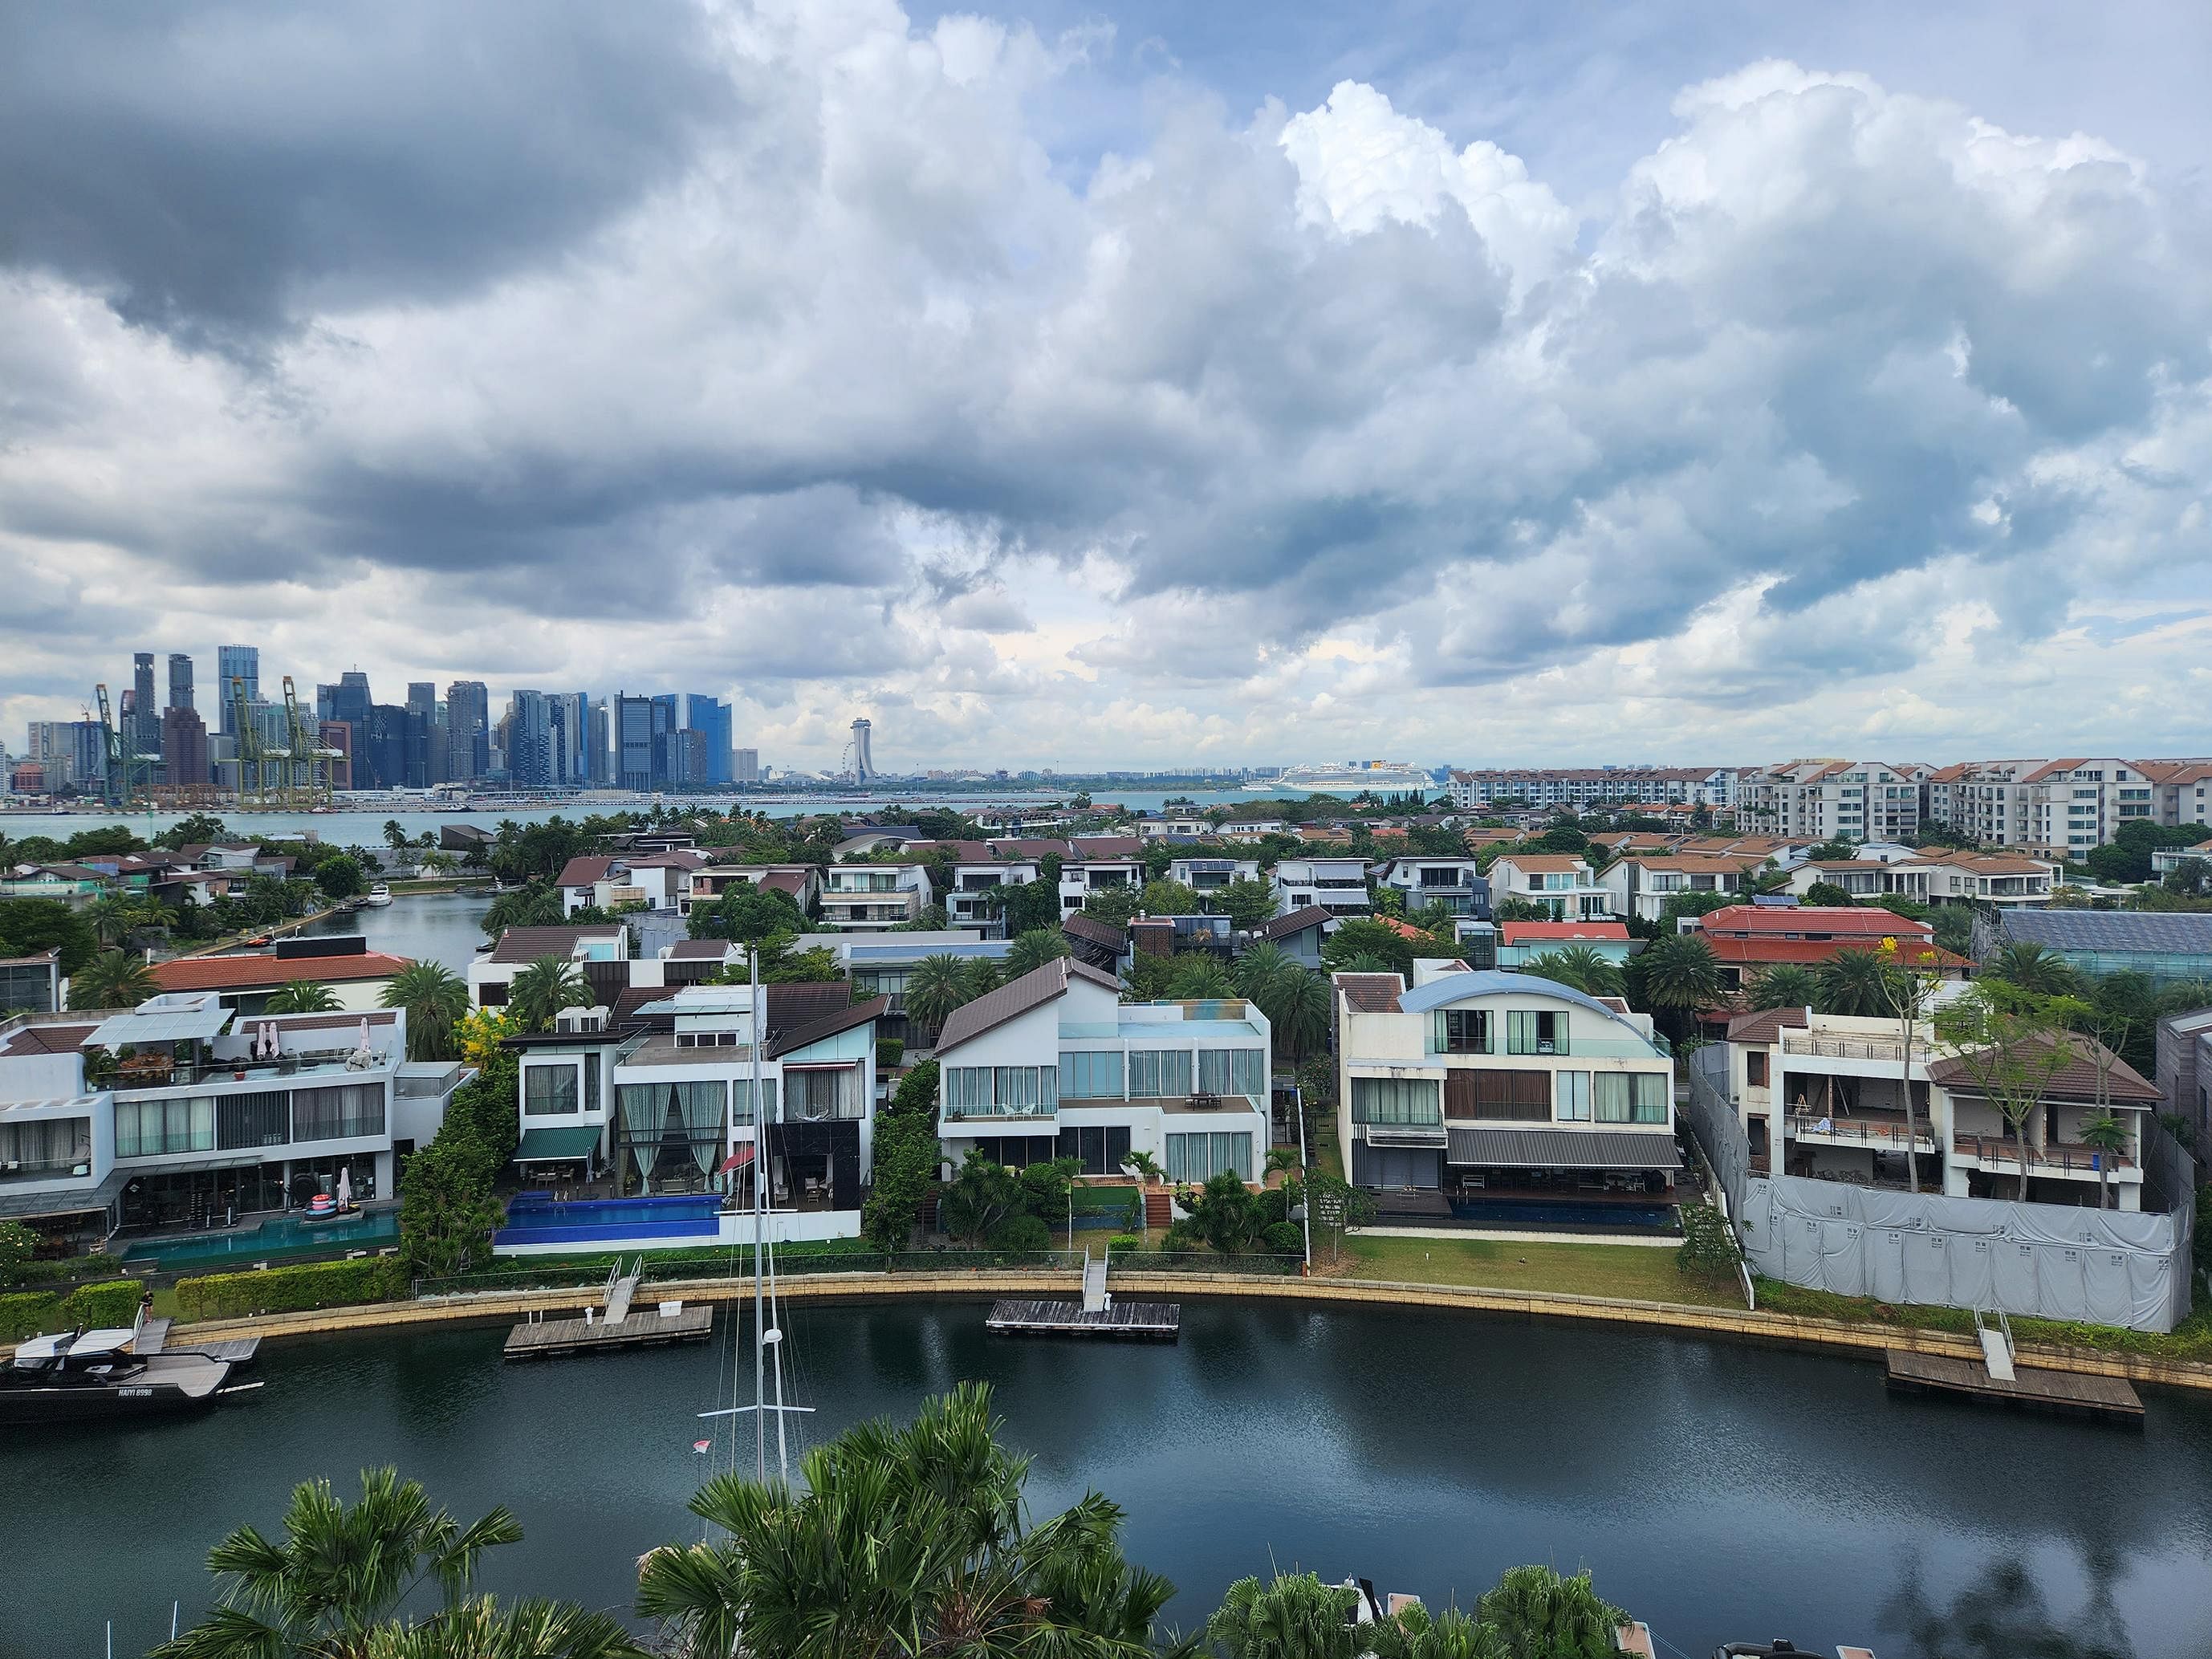 Waterfront dream: Sentosa Cove condo prices hit $1,648 psf – is it too good to miss?